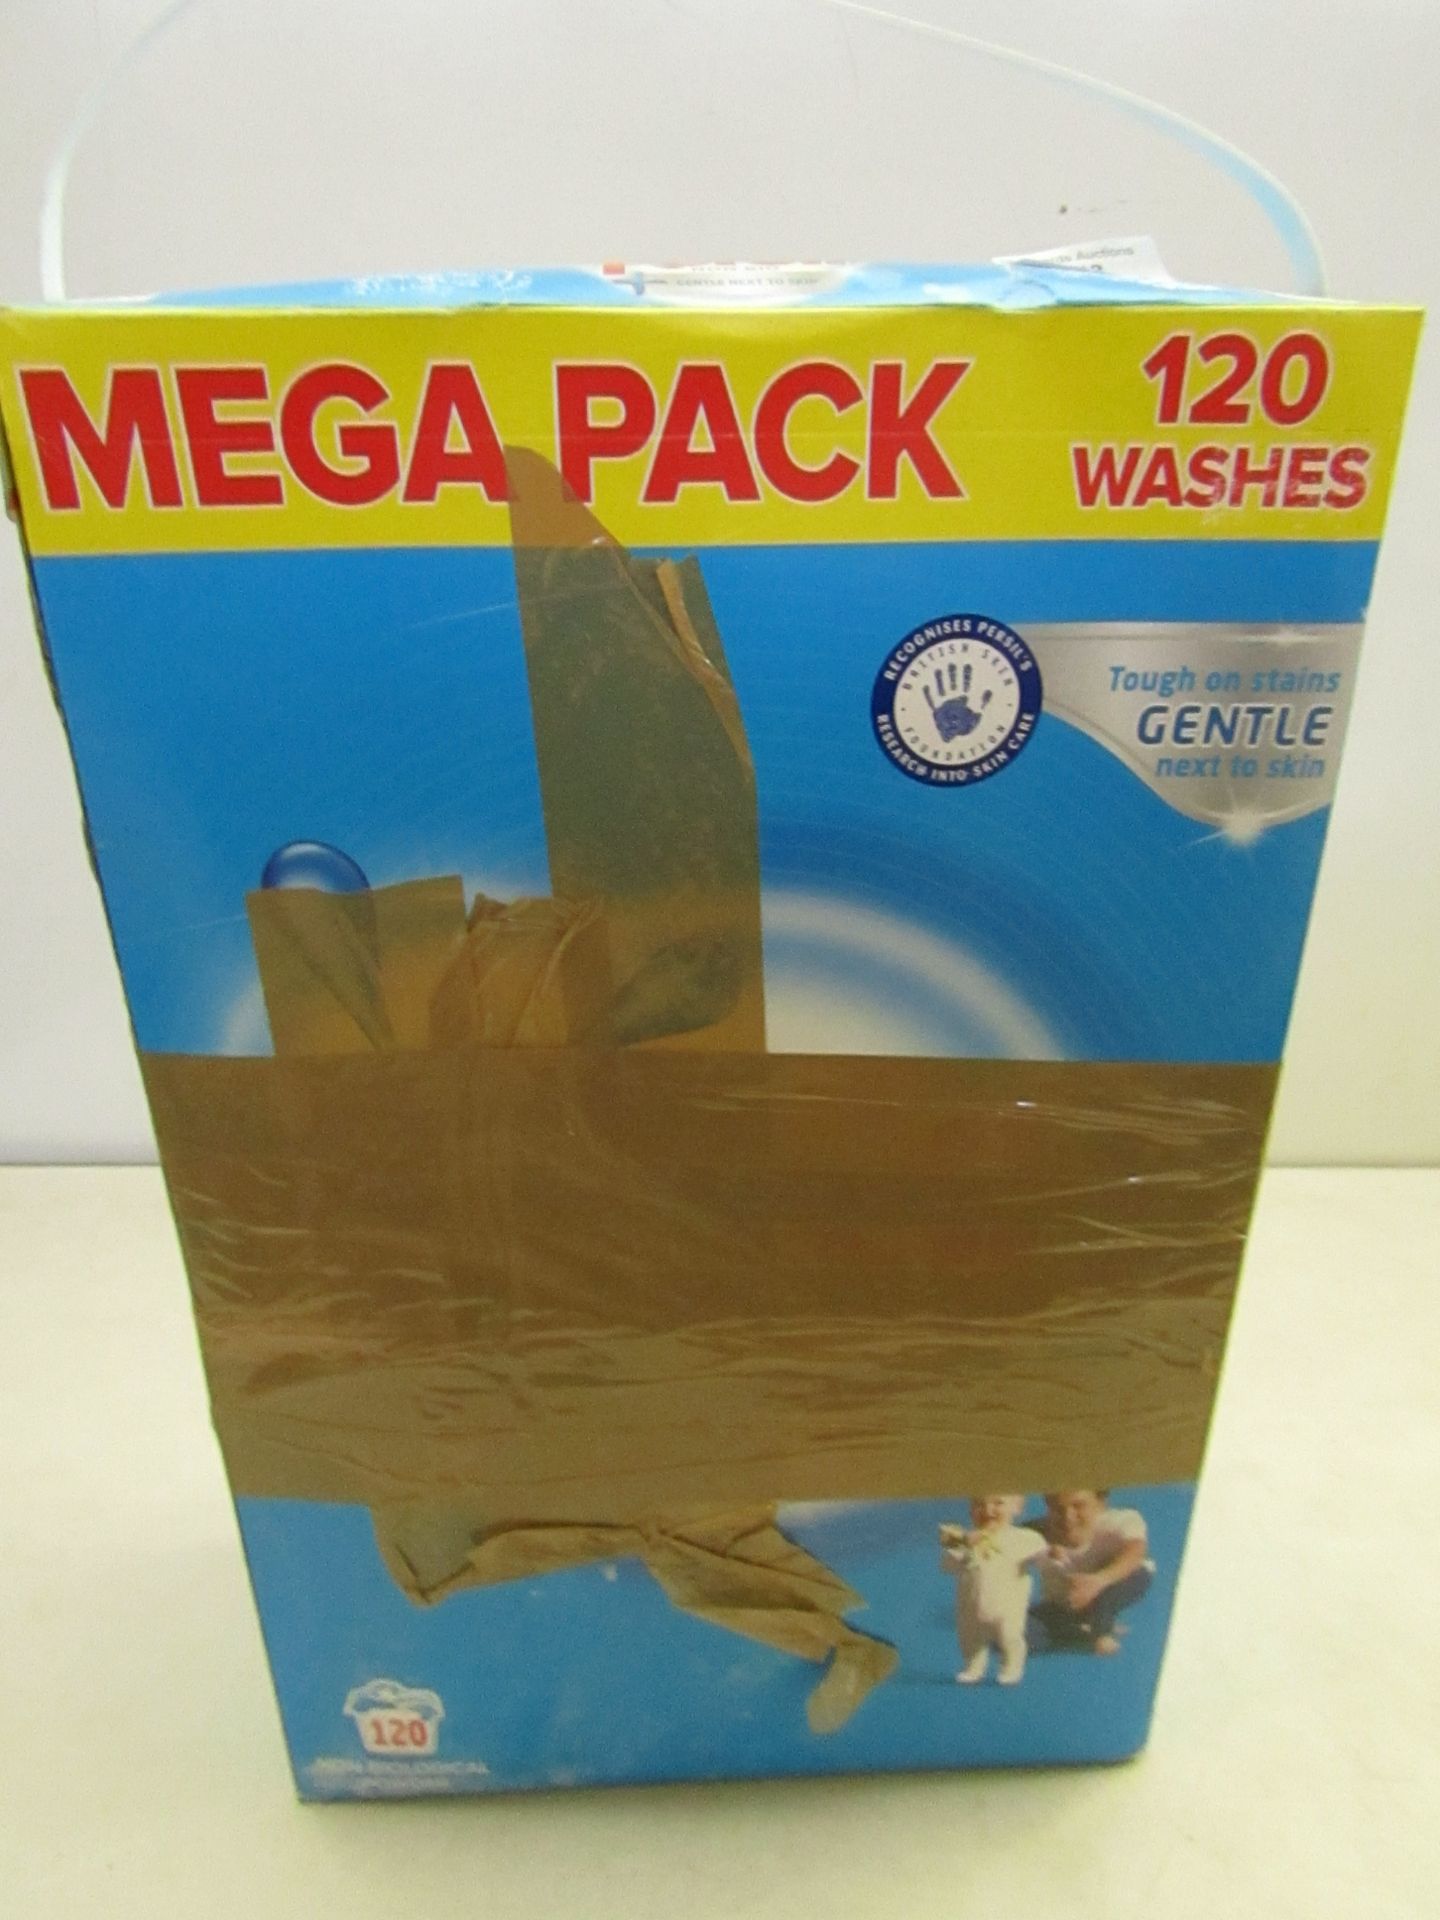 Persil mega pack non bio, gentle next to skin, 8.4kg, does 120 washes